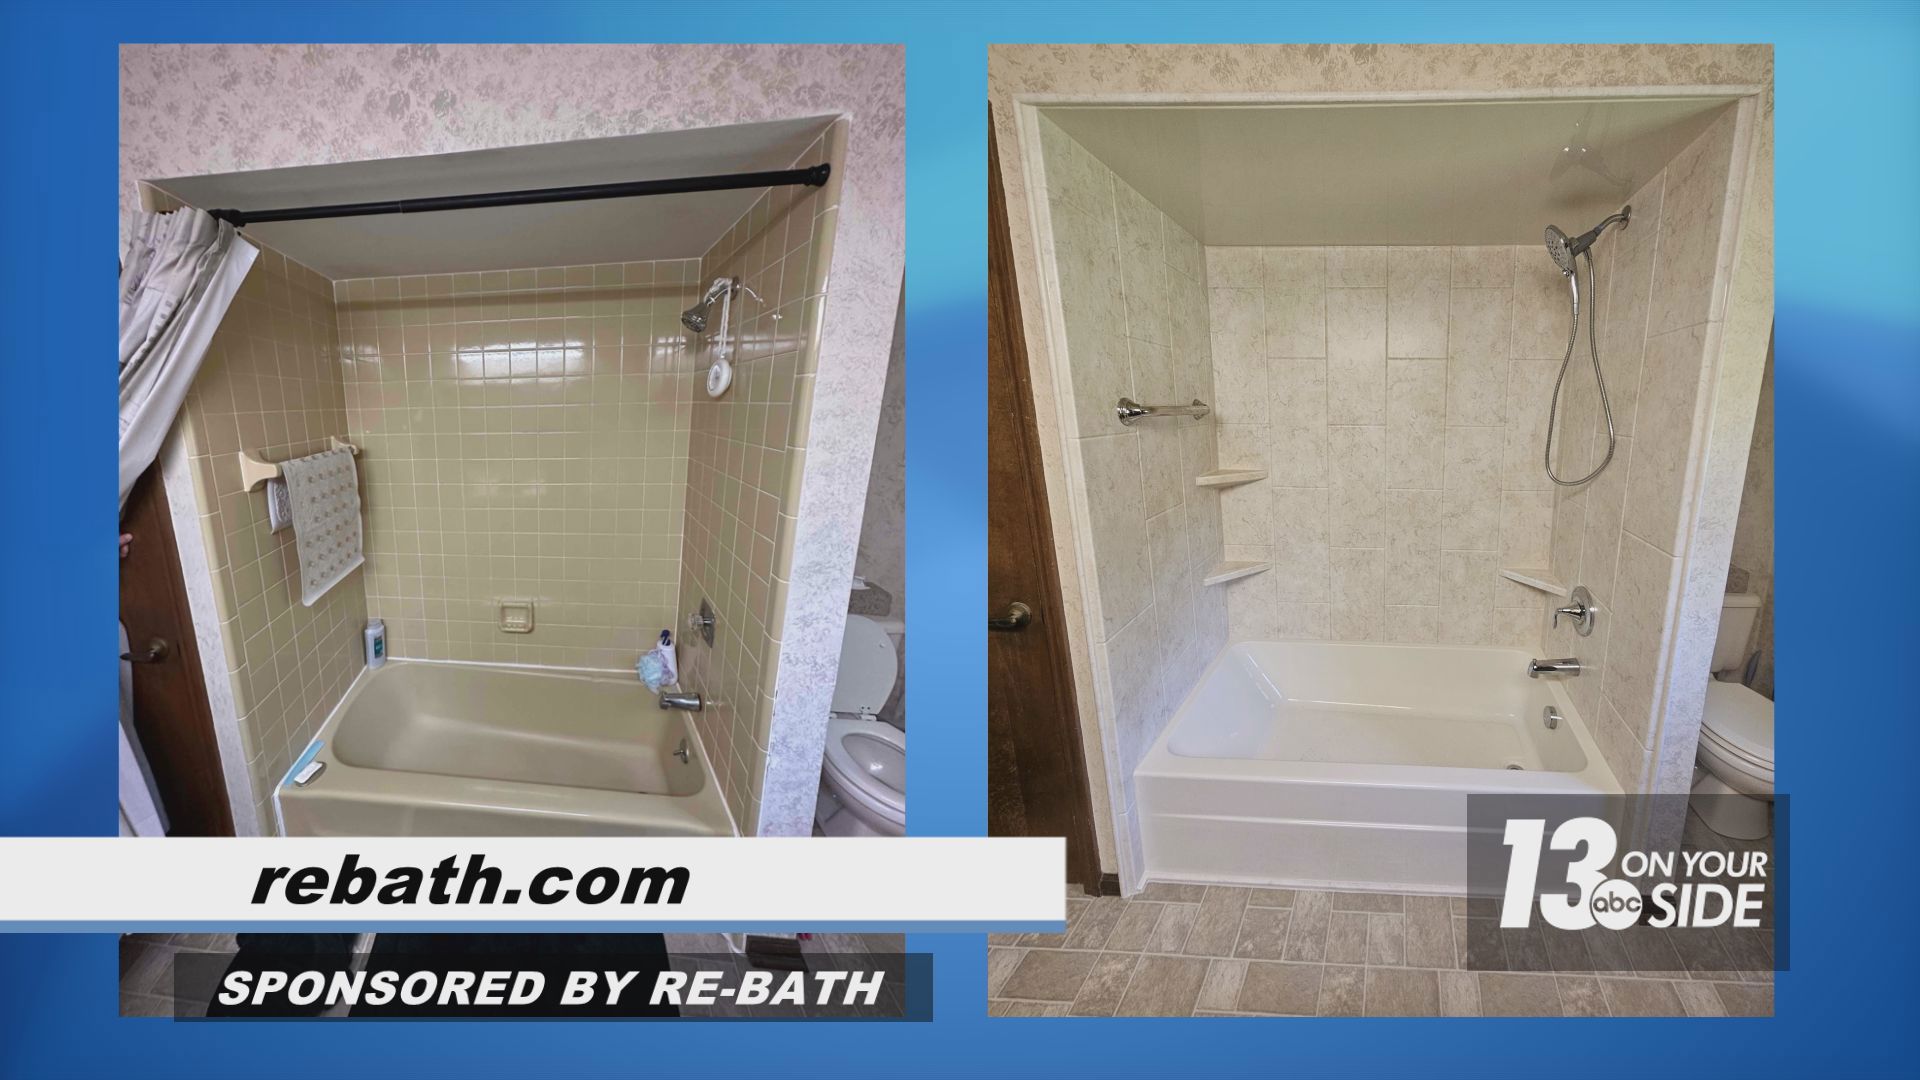 Whether you’re looking for an updated tub or shower, you need a more accessible space, or you want a complete bathroom re-model, Re-Bath does it all.